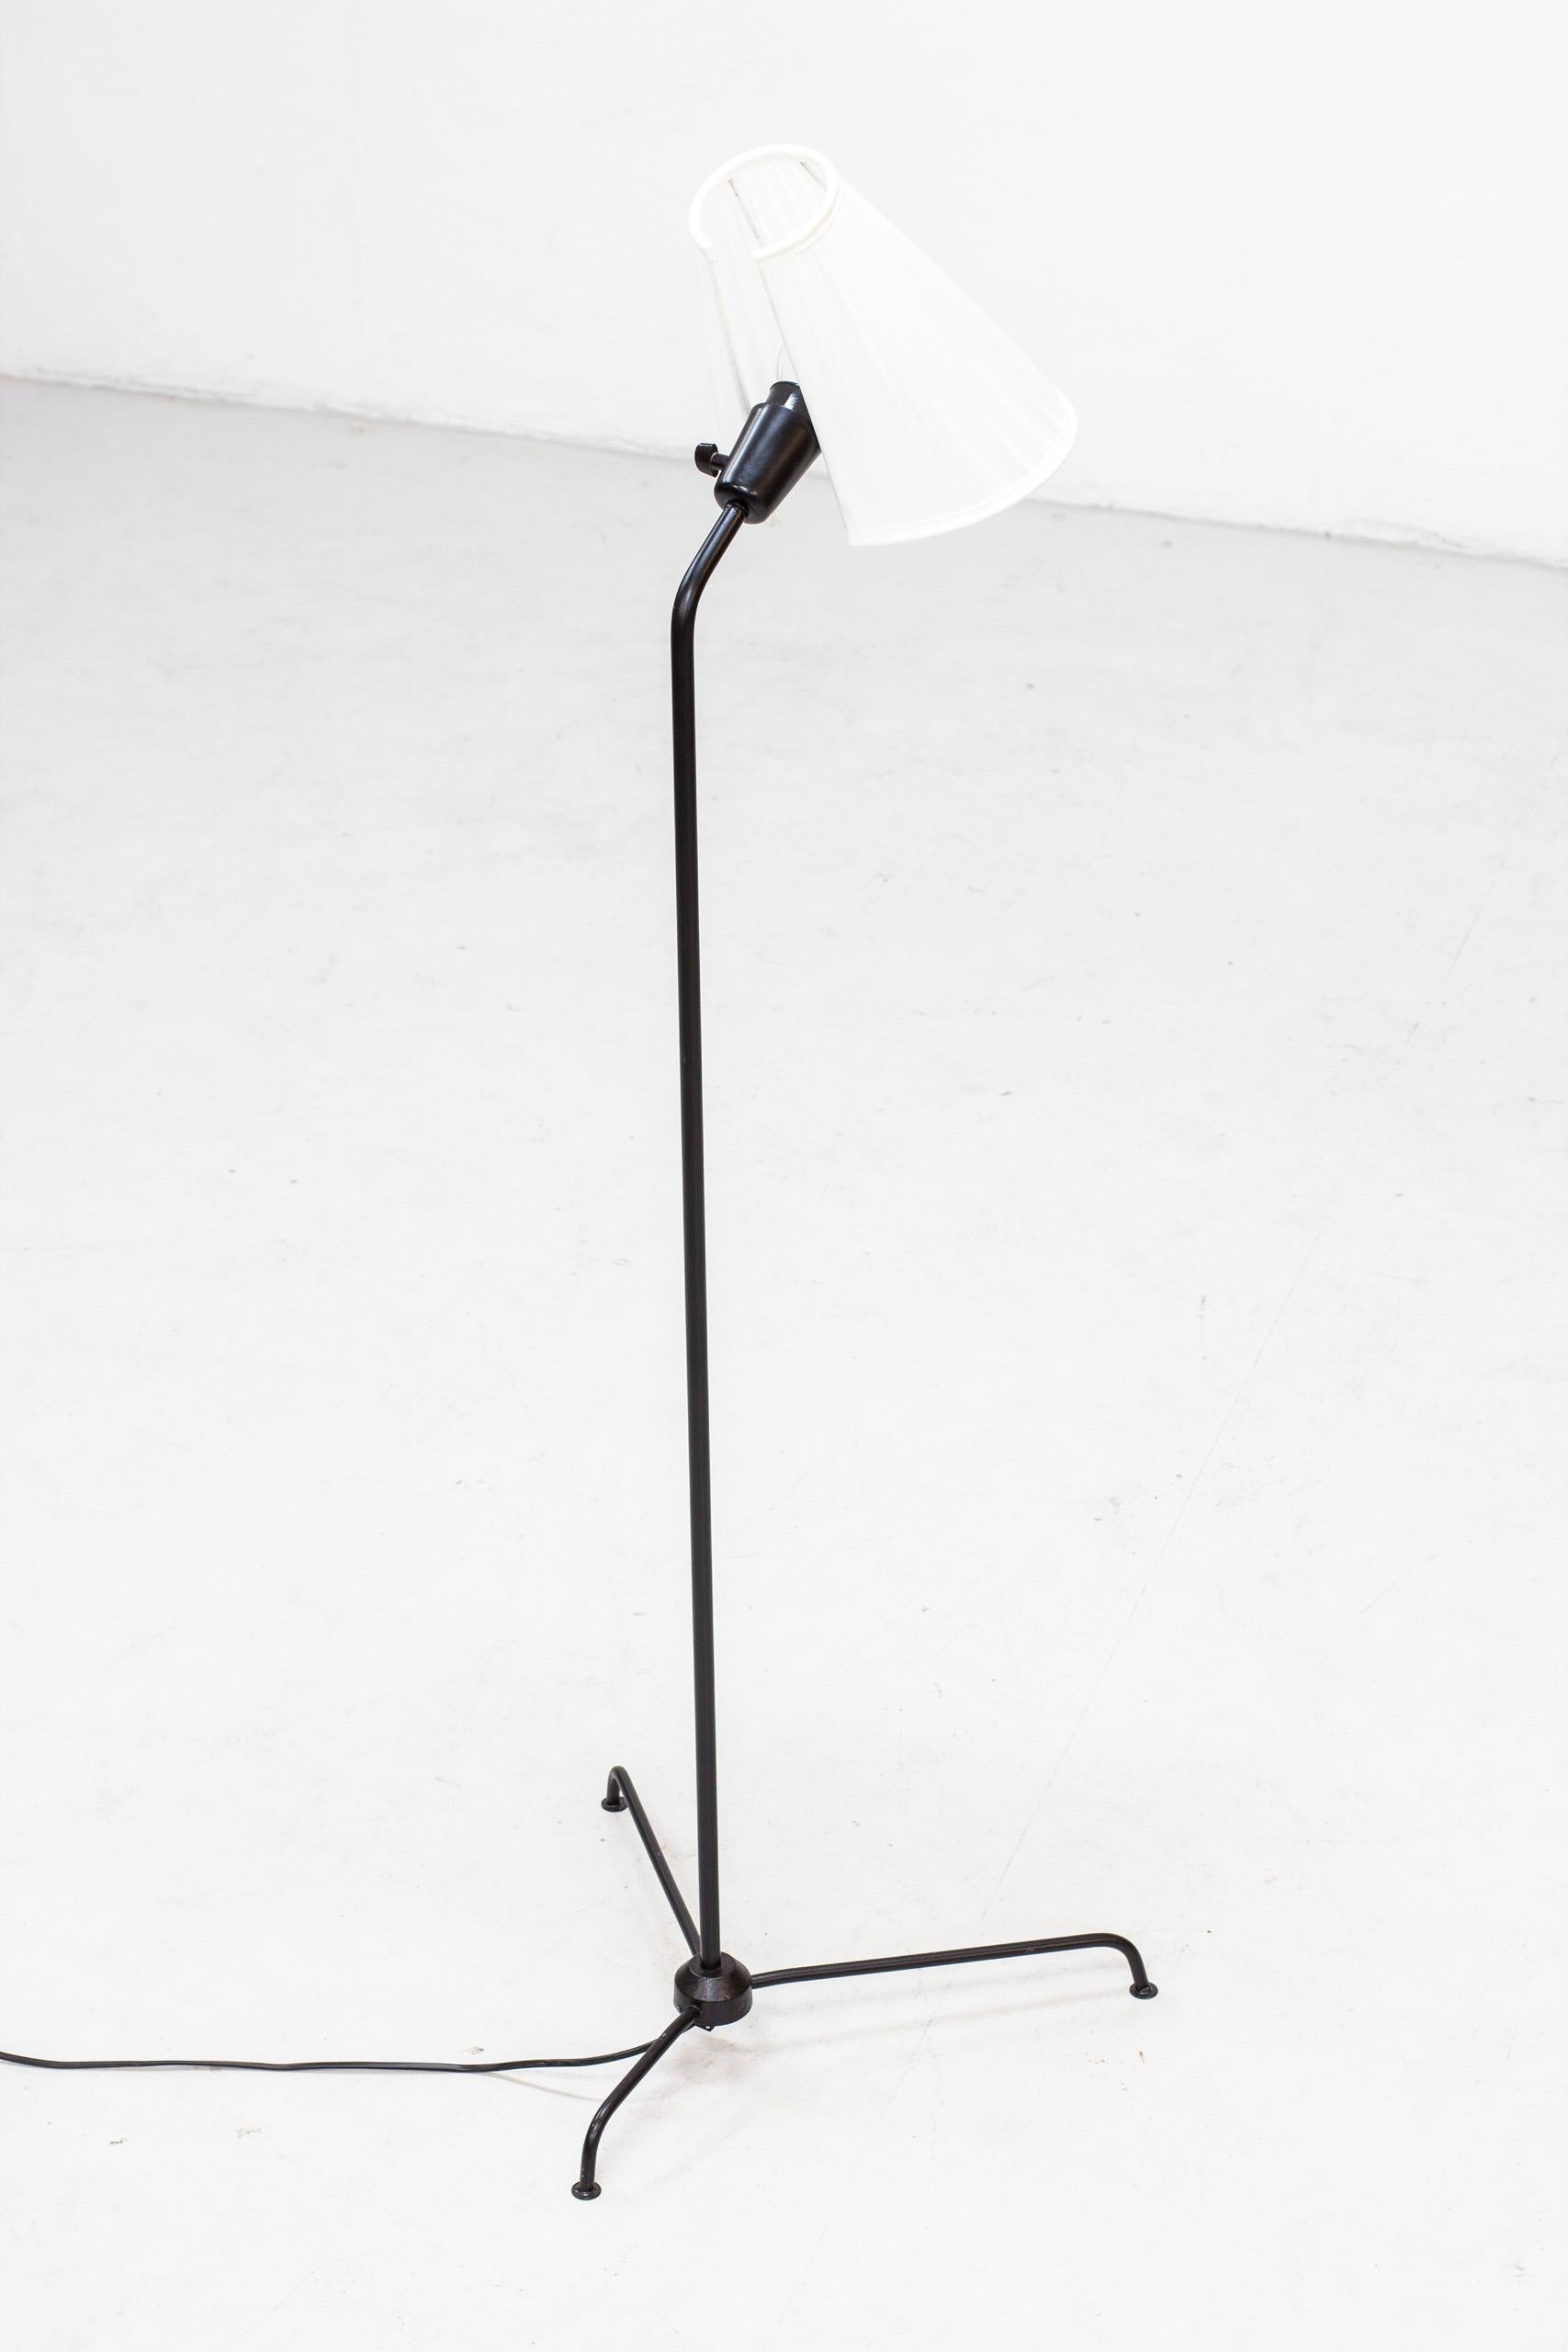 Floor lamp designed by Eje Ahlgren produced in Sweden by Luco during the 1950s. Made from black lacquered metal with original lamp shade reupholstered in white chintz fabric. Original light switch on the lamp fixture in working order. Very good